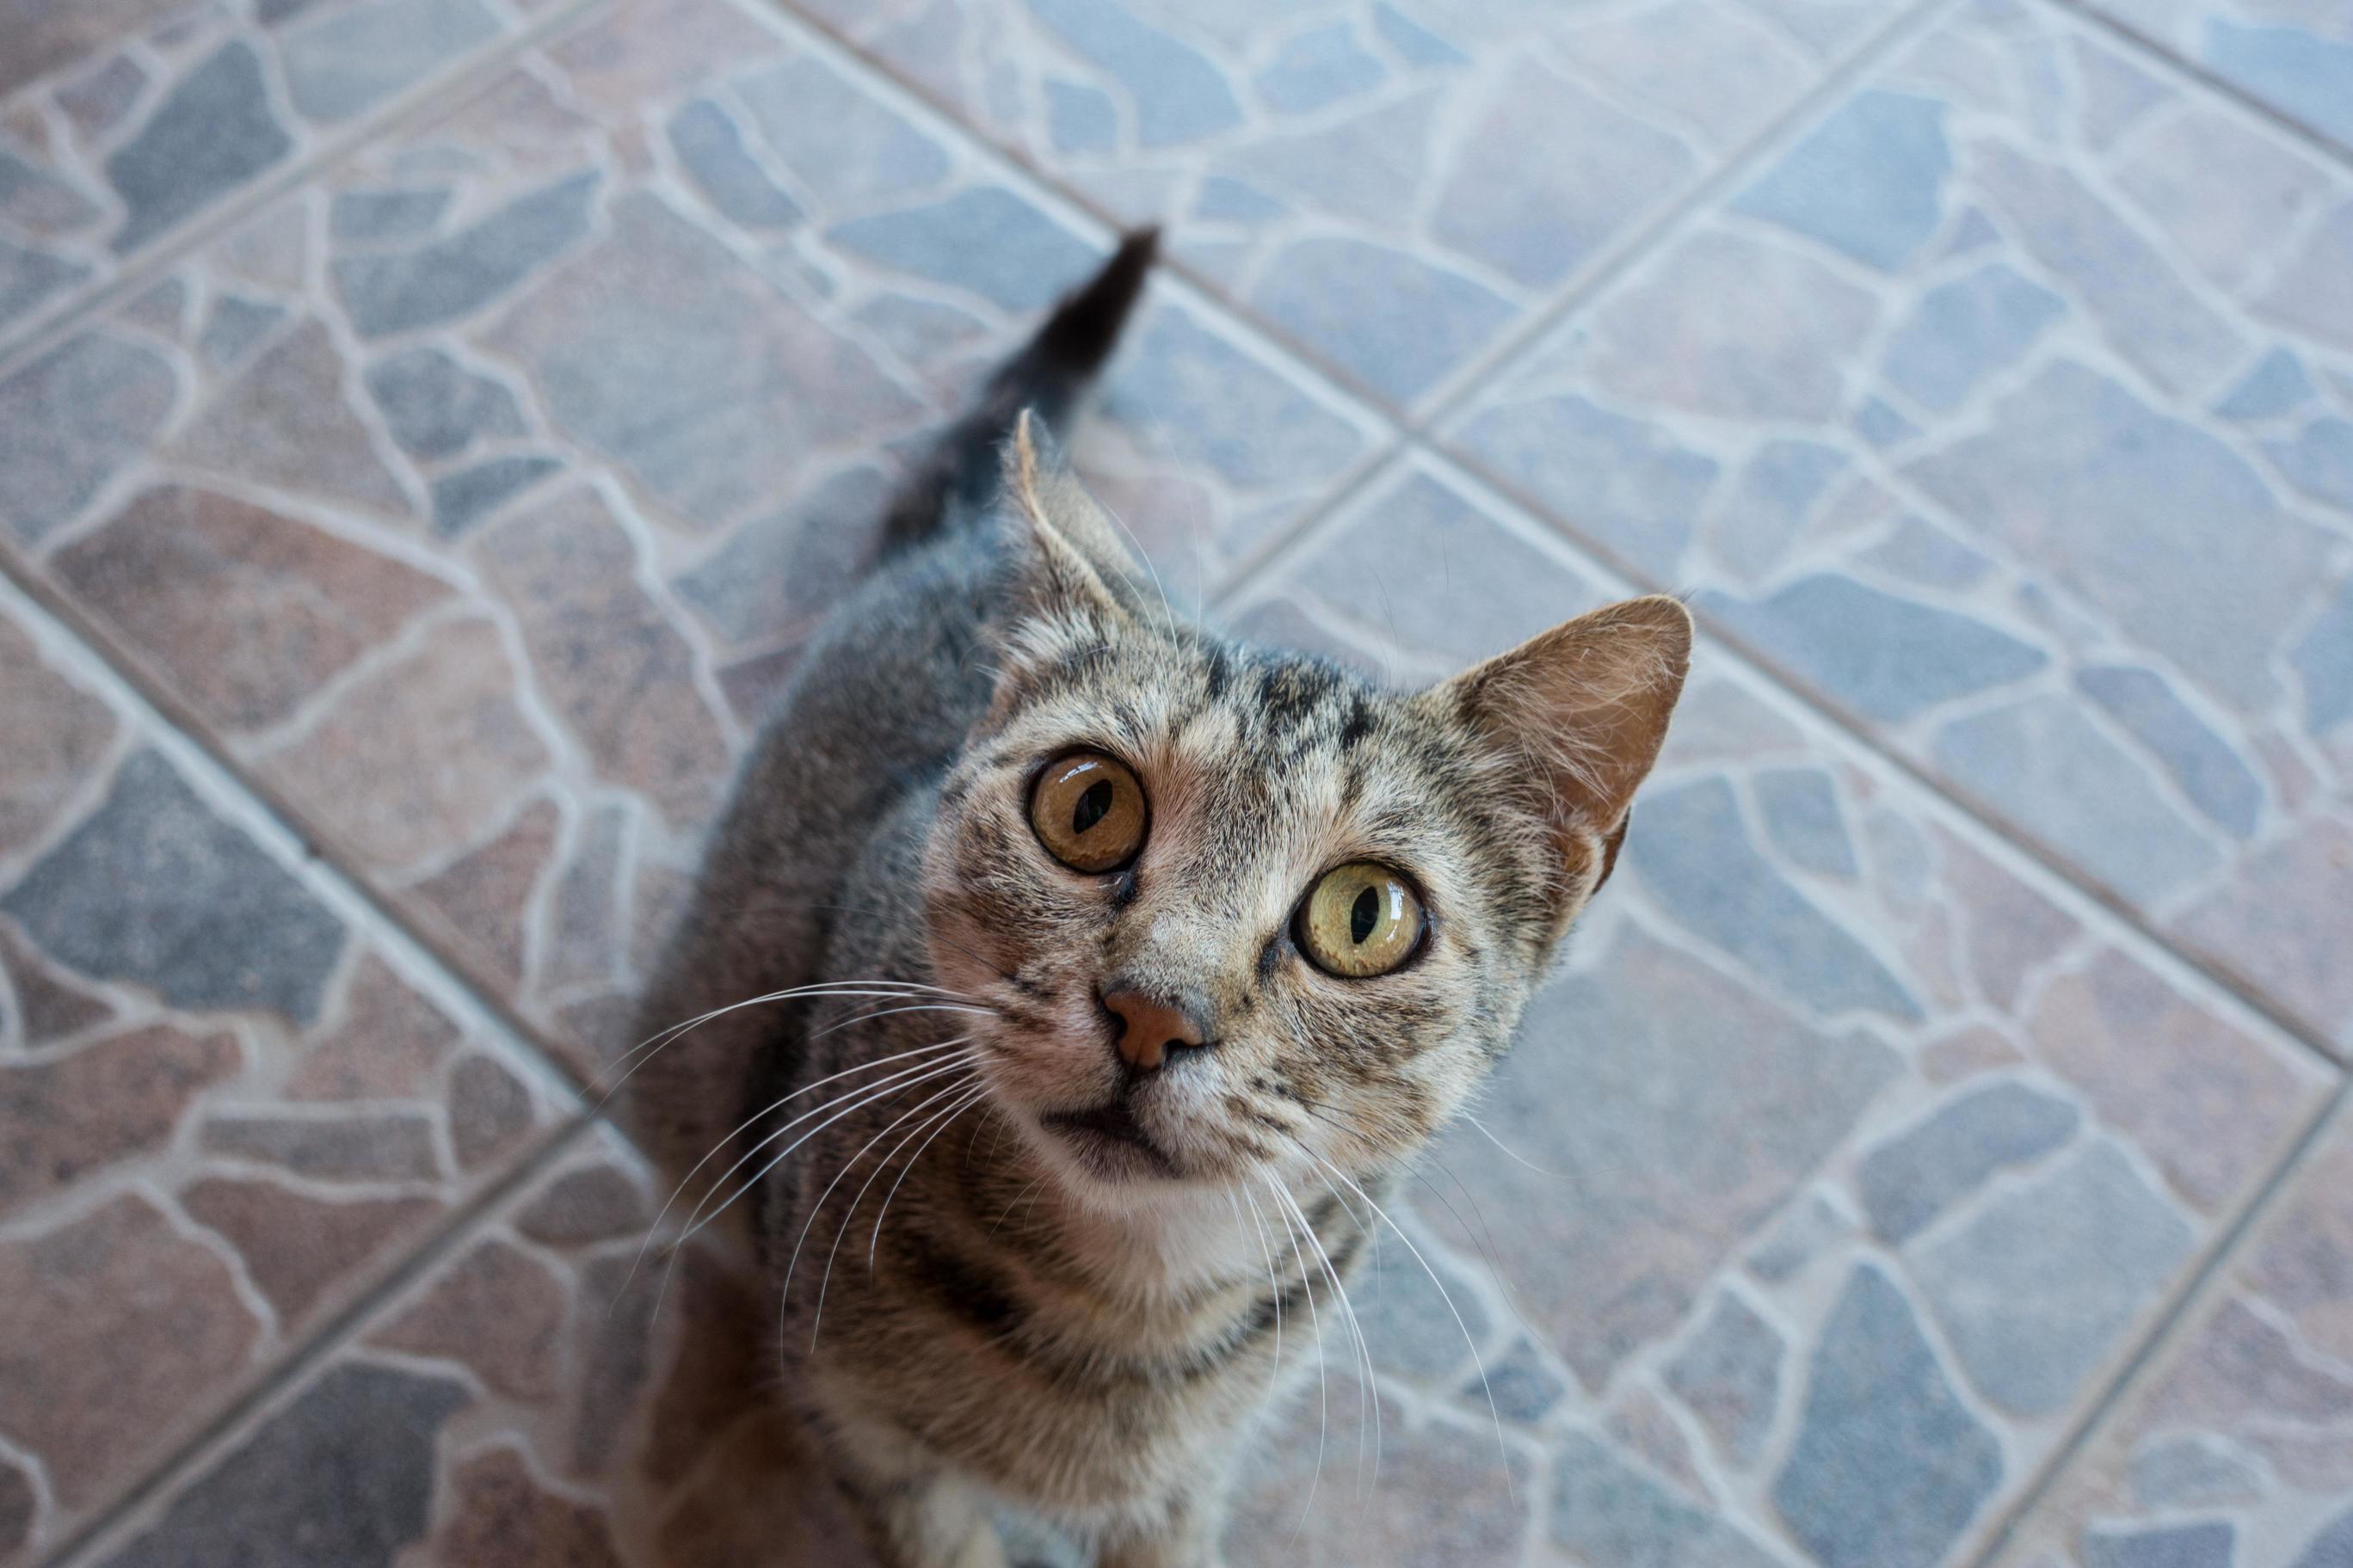 One of the many cats i saw in greece.